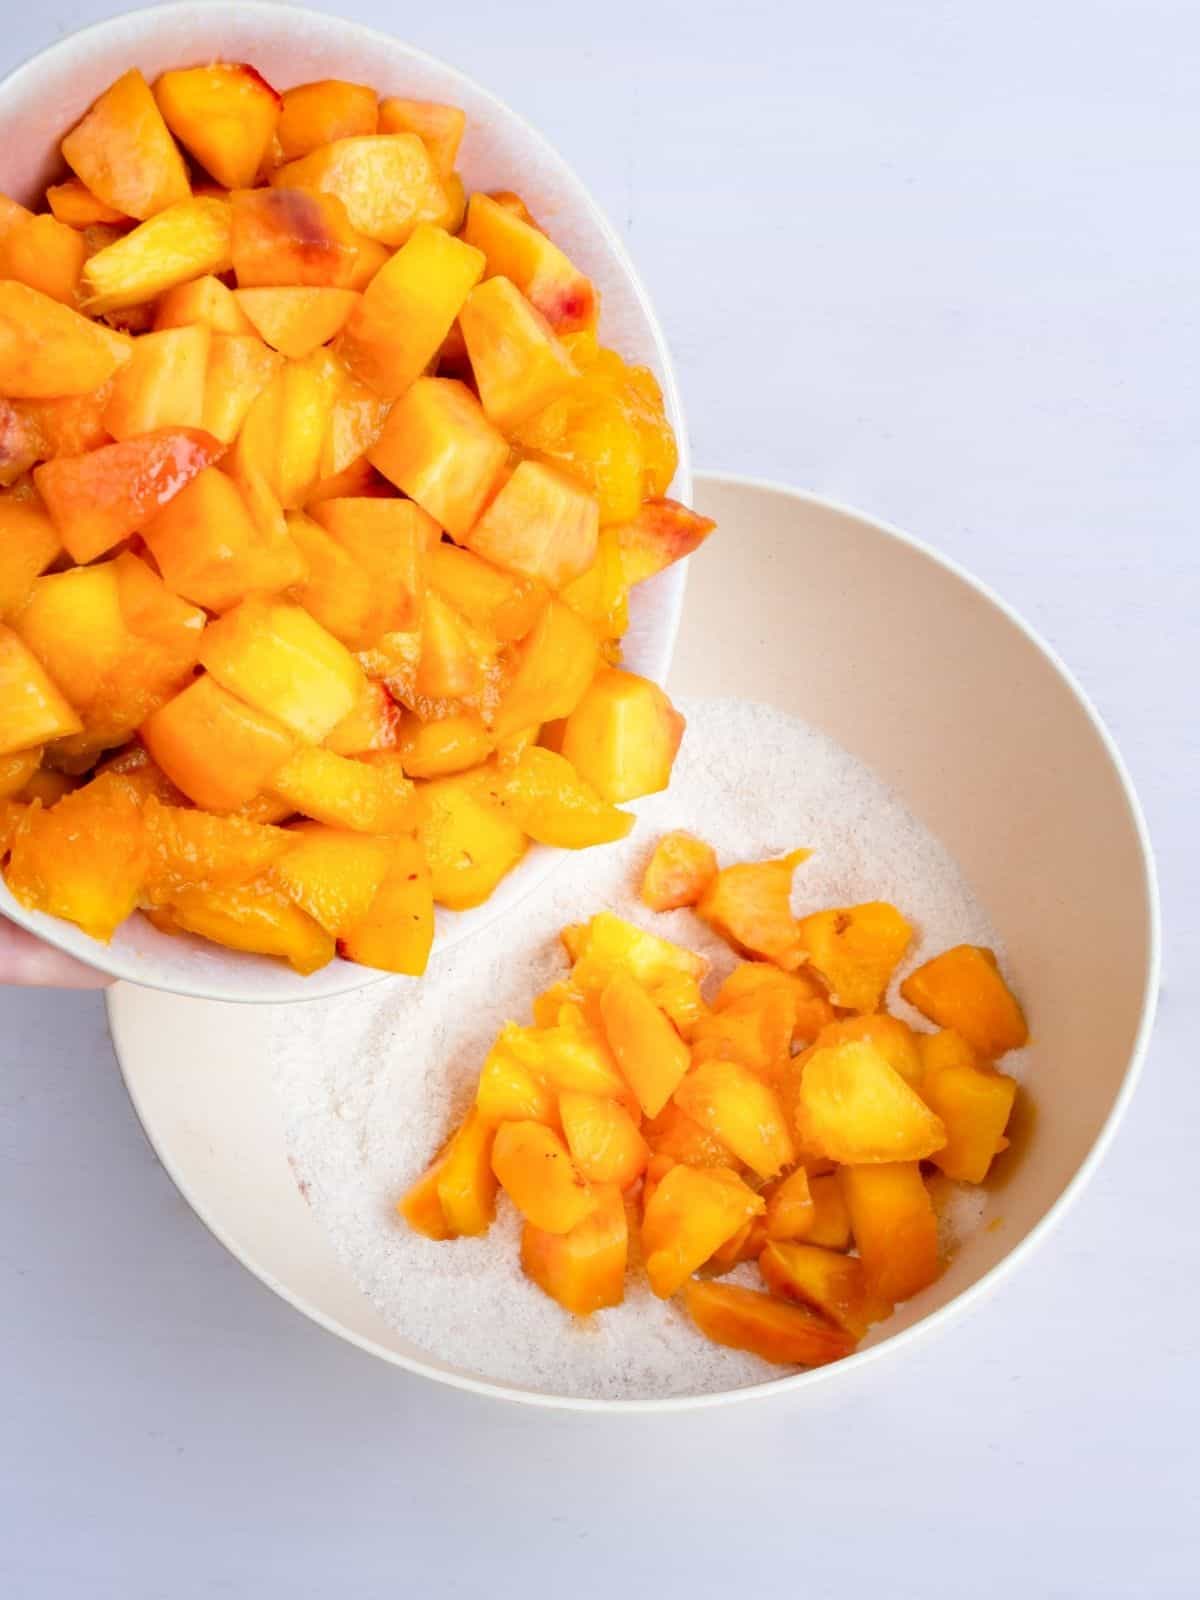 add diced peaches to bowl with flour, cinnamon mixture.